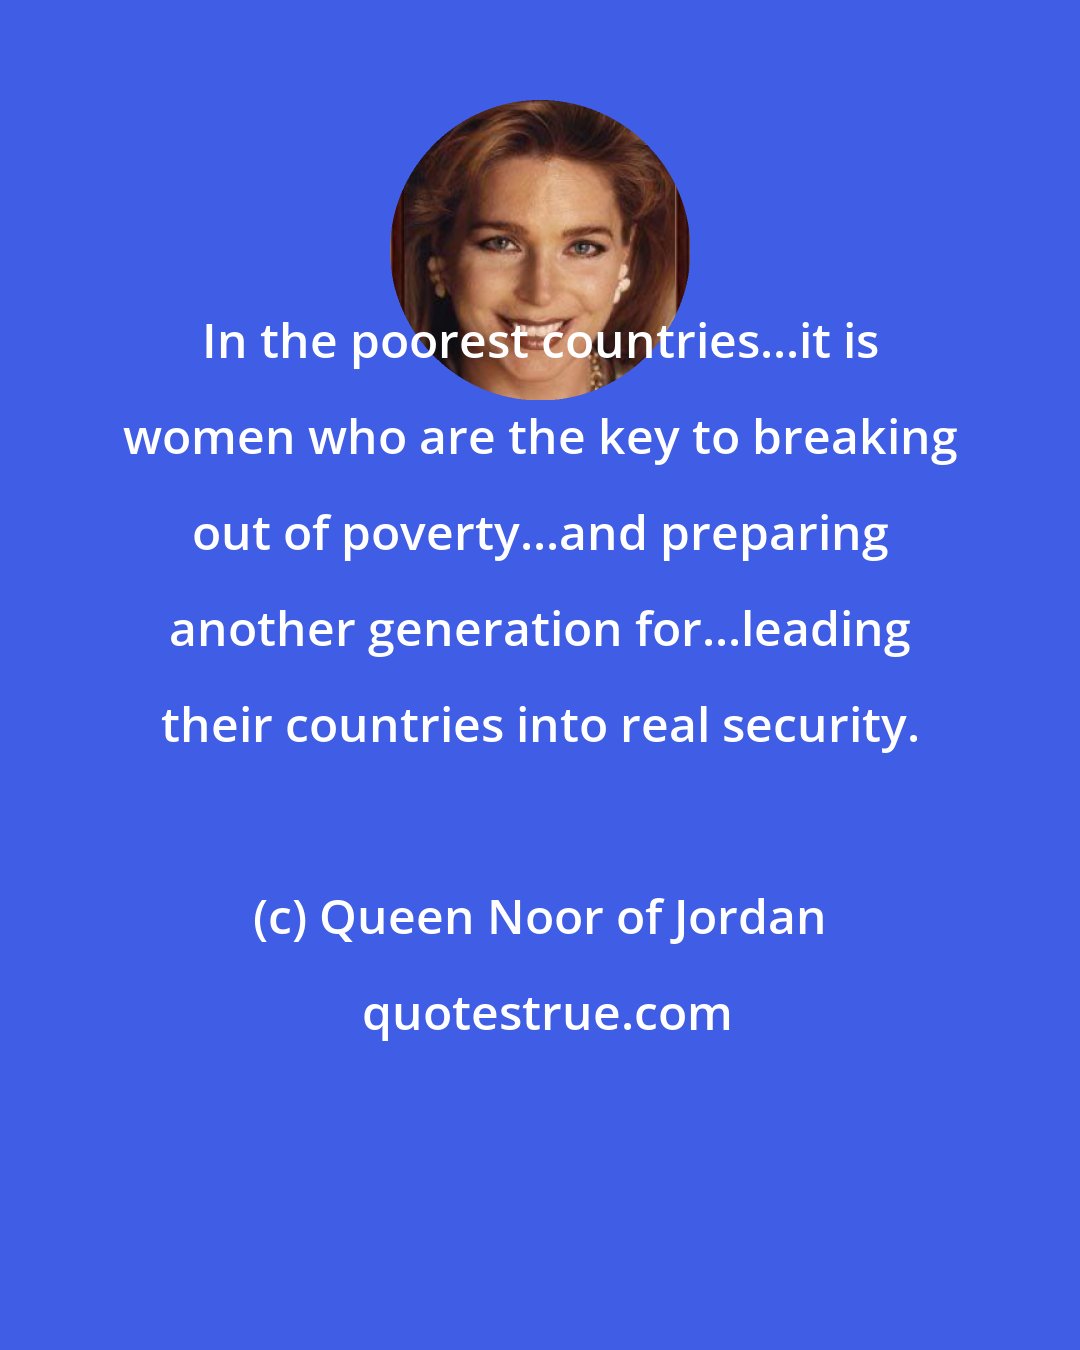 Queen Noor of Jordan: In the poorest countries...it is women who are the key to breaking out of poverty...and preparing another generation for...leading their countries into real security.